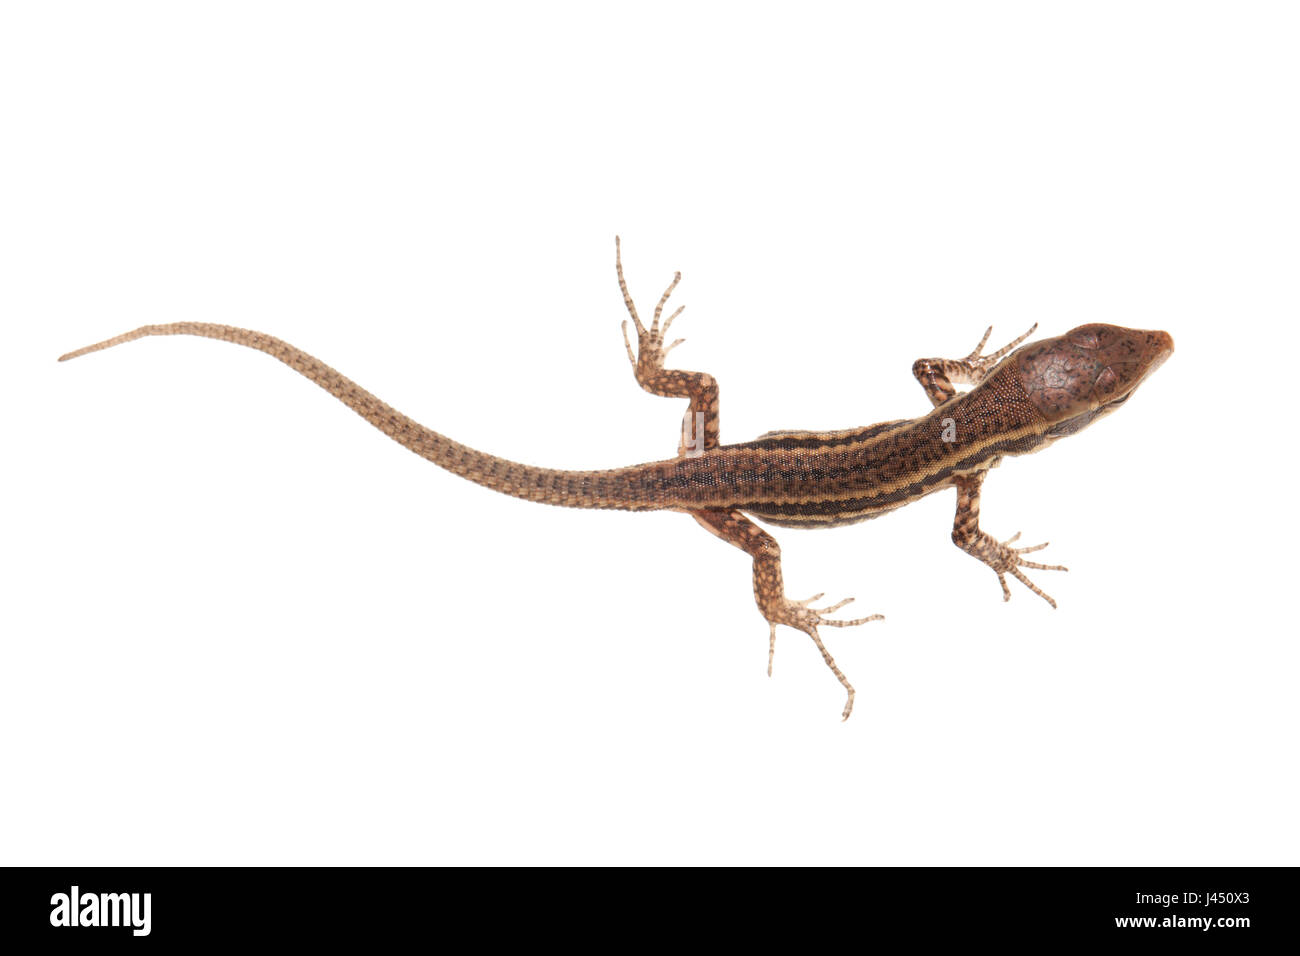 common wall lizard juvenile isolated against a white background Stock Photo